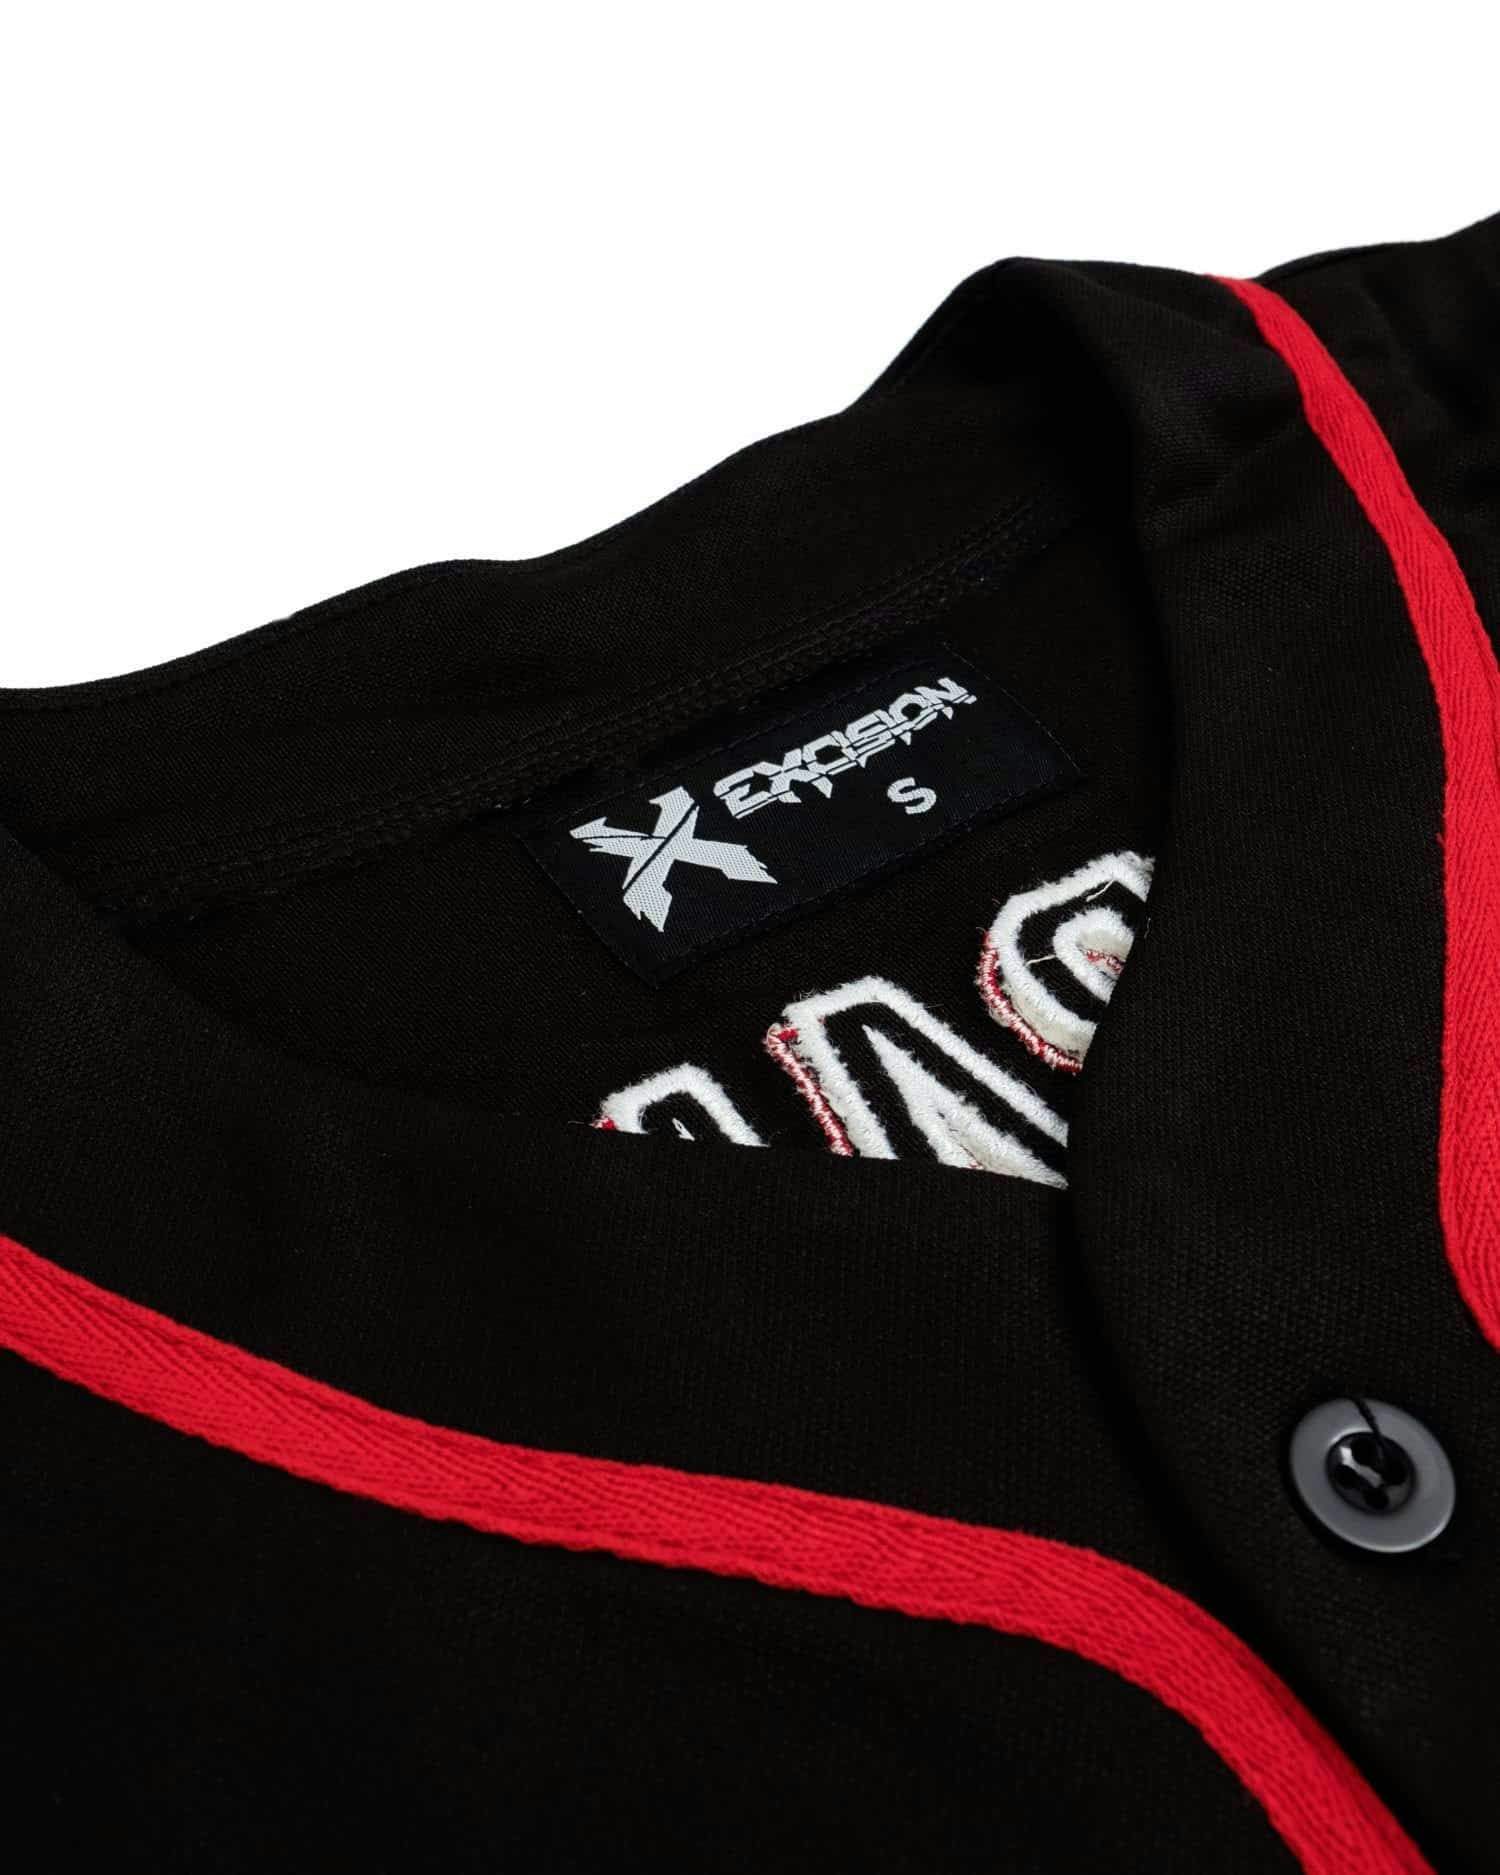 black and red baseball jersey